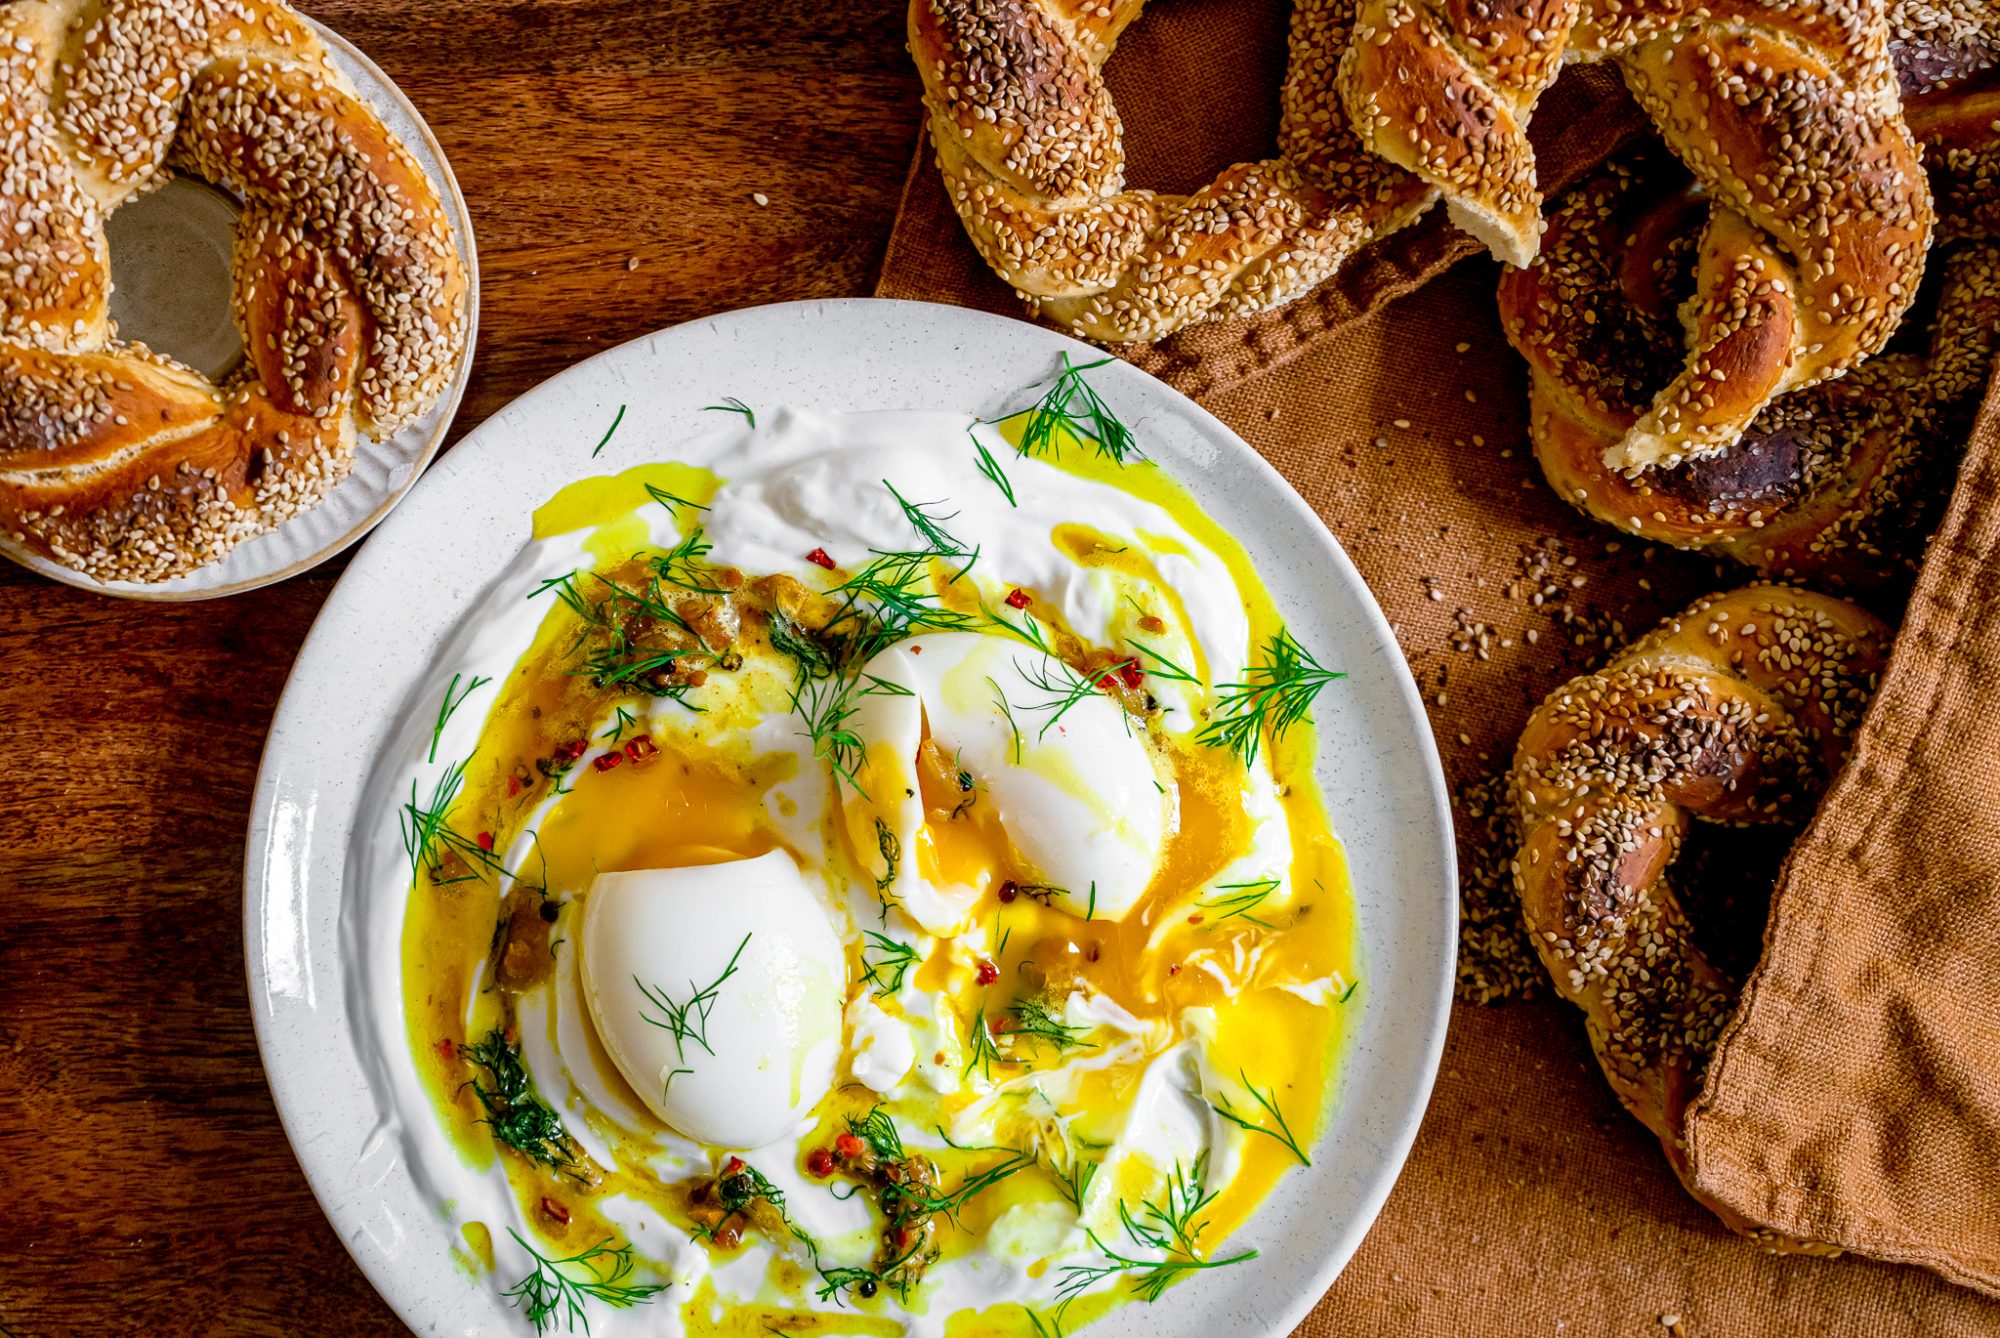 Cilbir - Turkish Soft-Boiled Eggs with Yogurt and Spiced Butter with Homemade Simit (Turkish Bagel), Déjeuners et brunchs